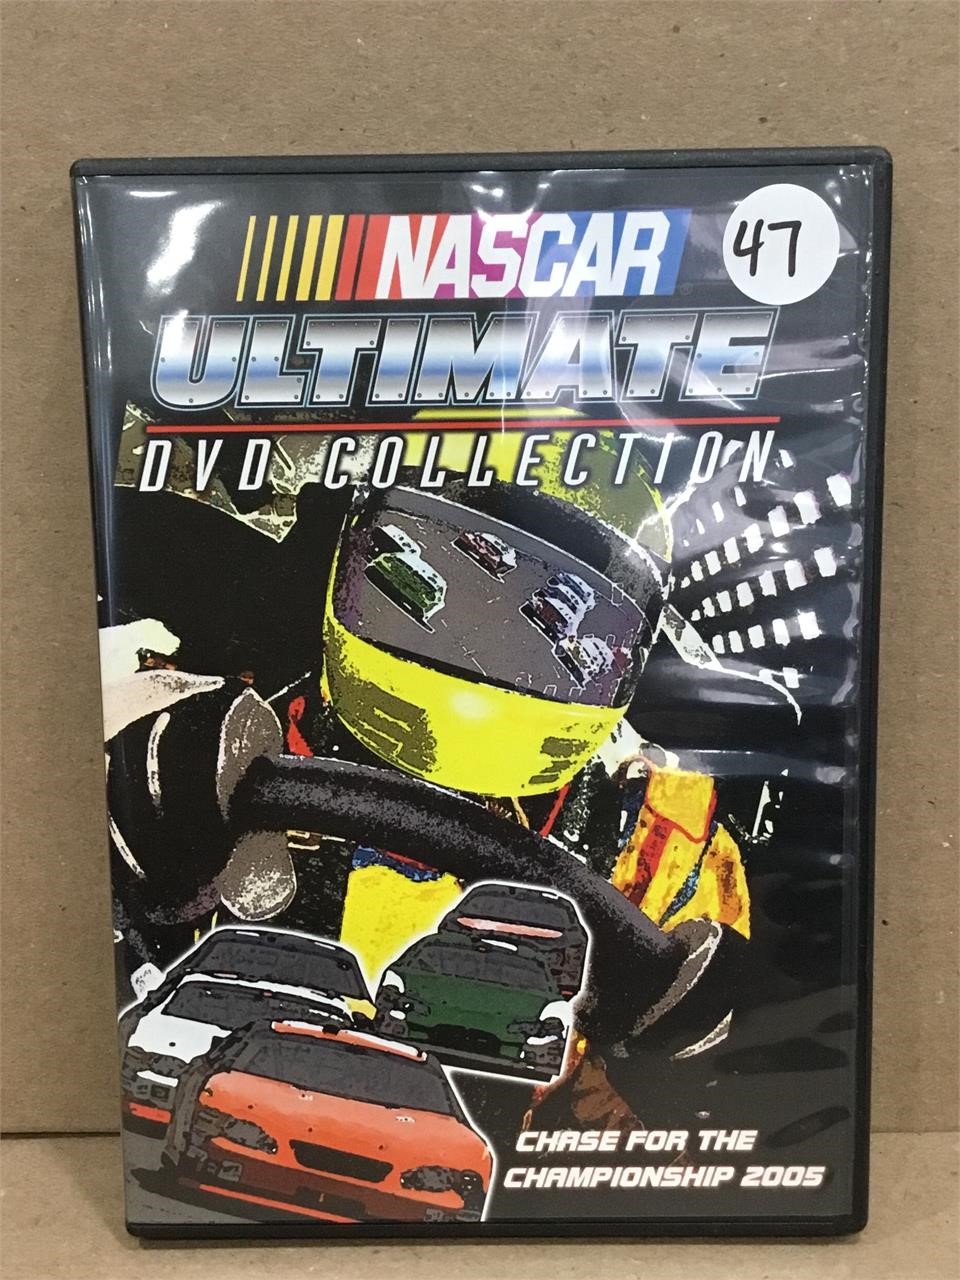 2005 Nascar Ultimate DVD Collection